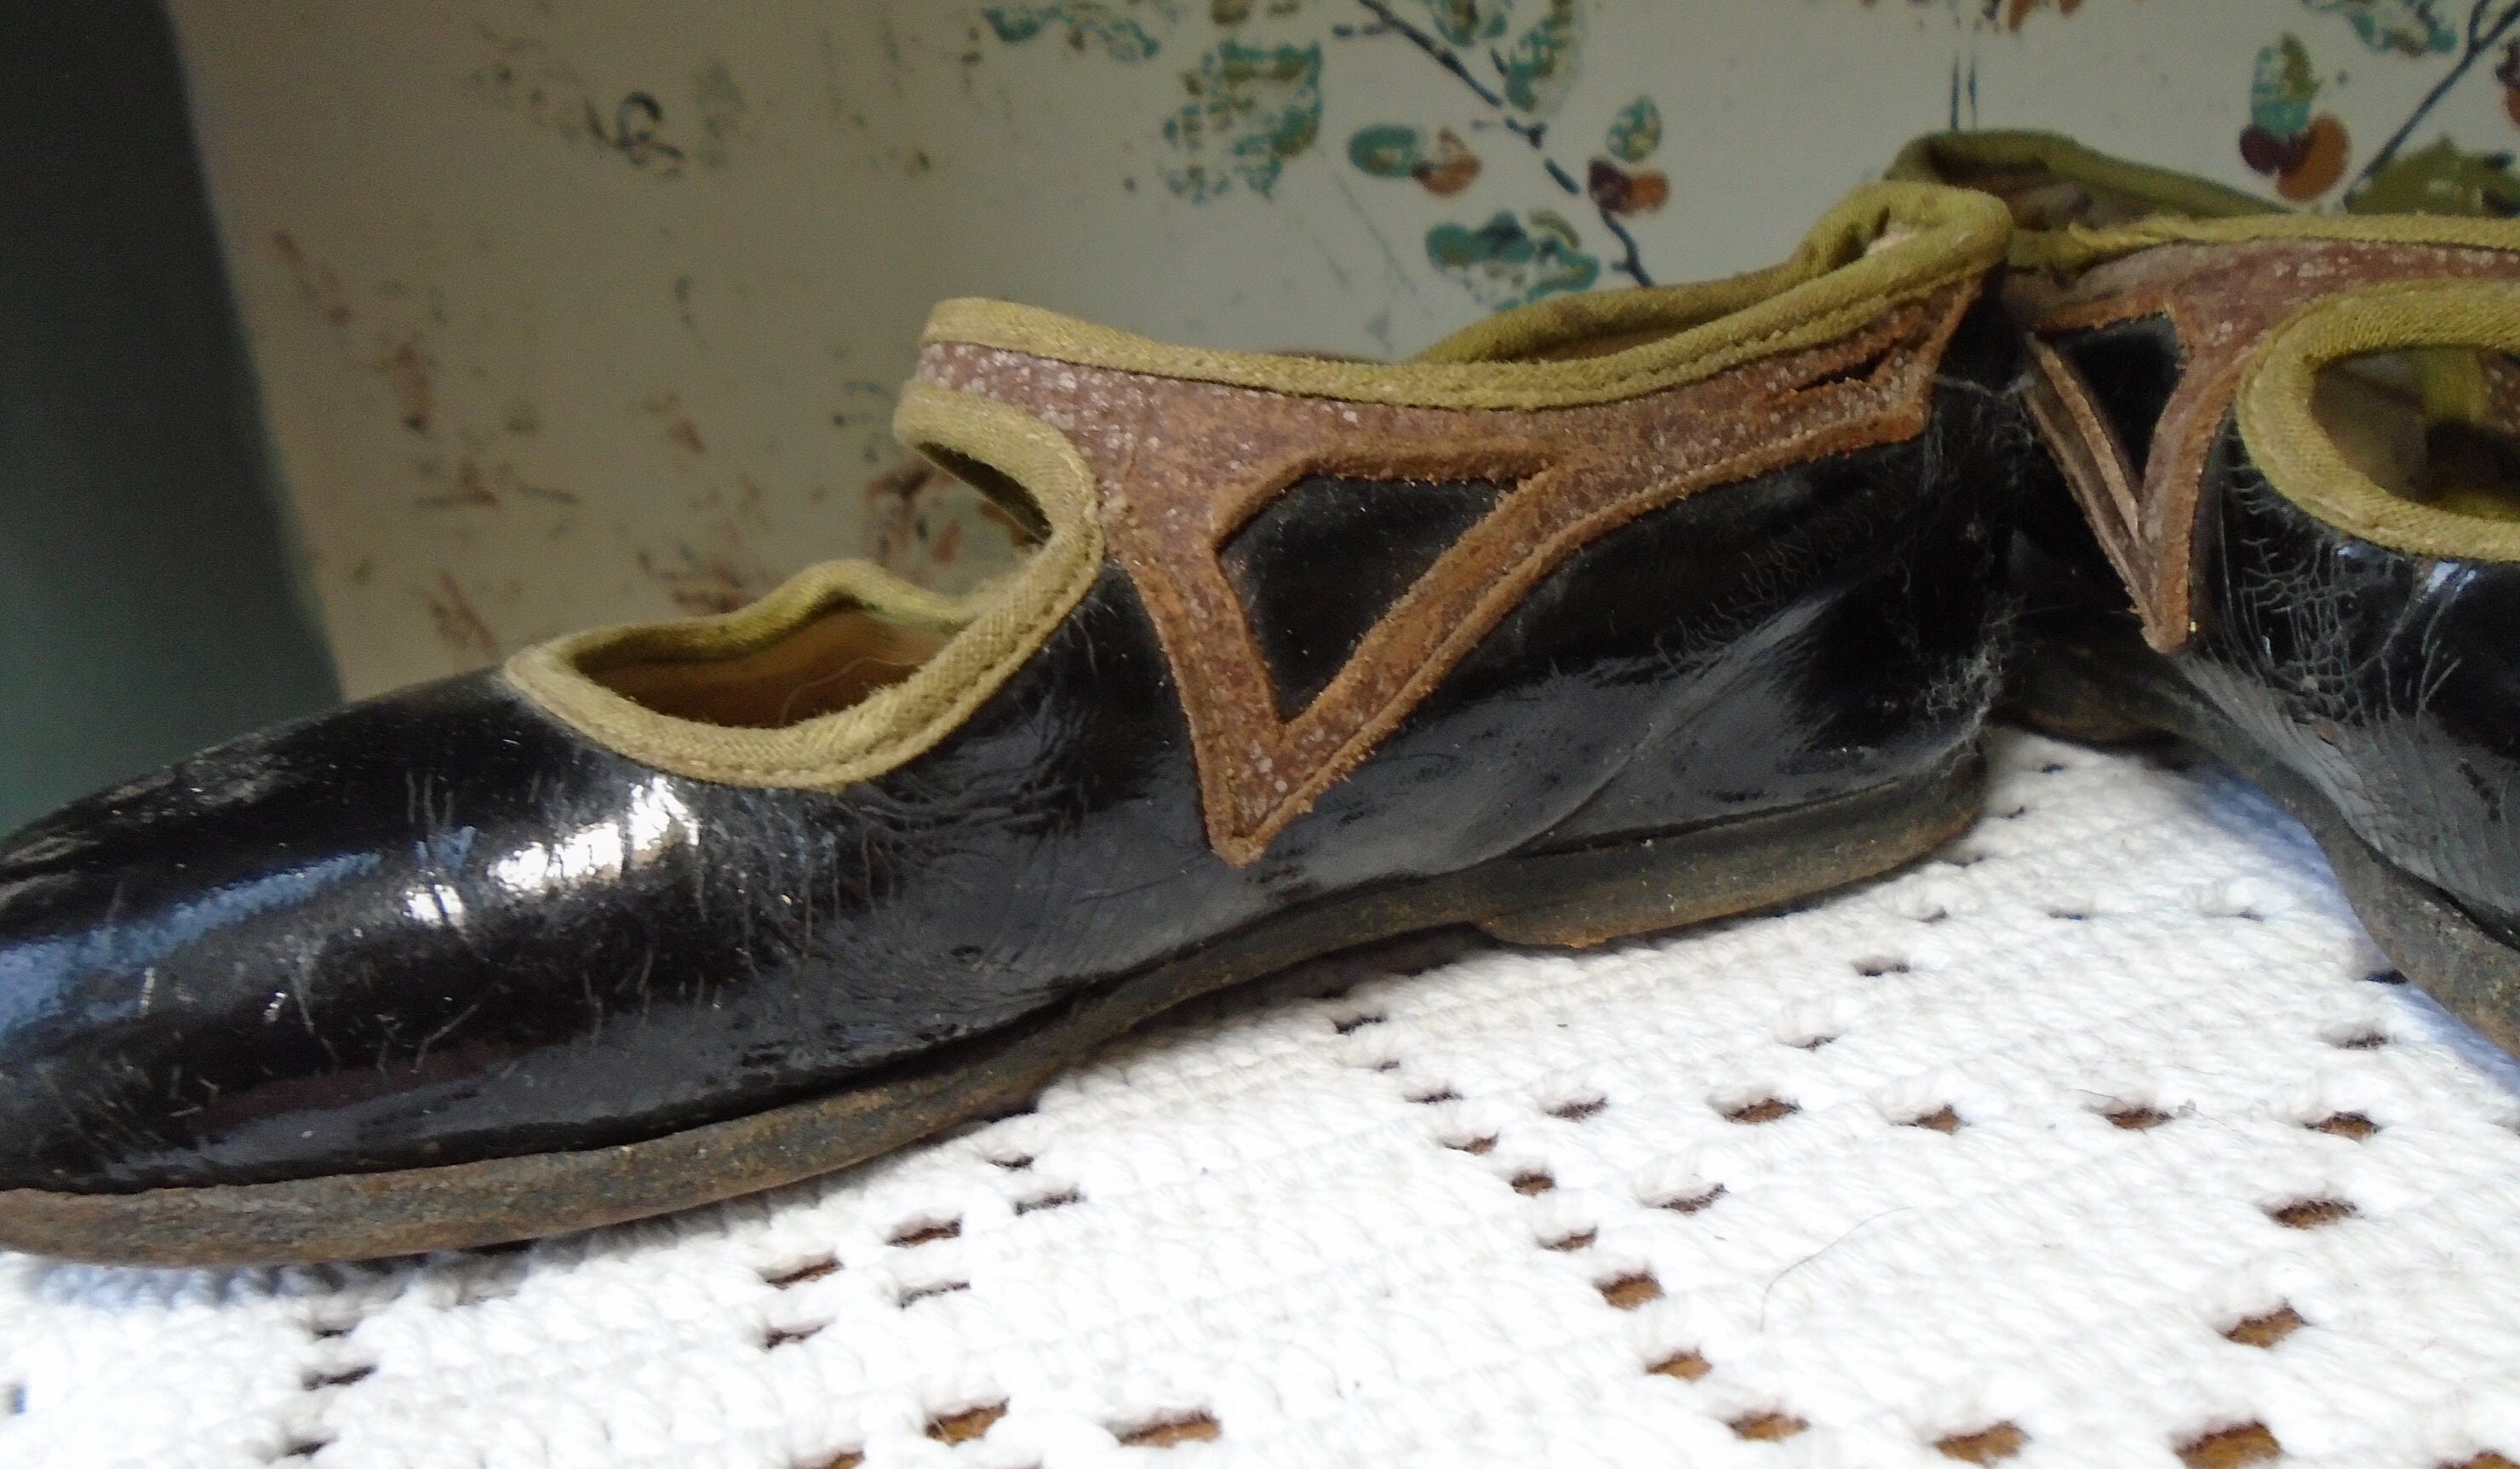 1920's Little Girls Patent Leather Shoes - Etsy